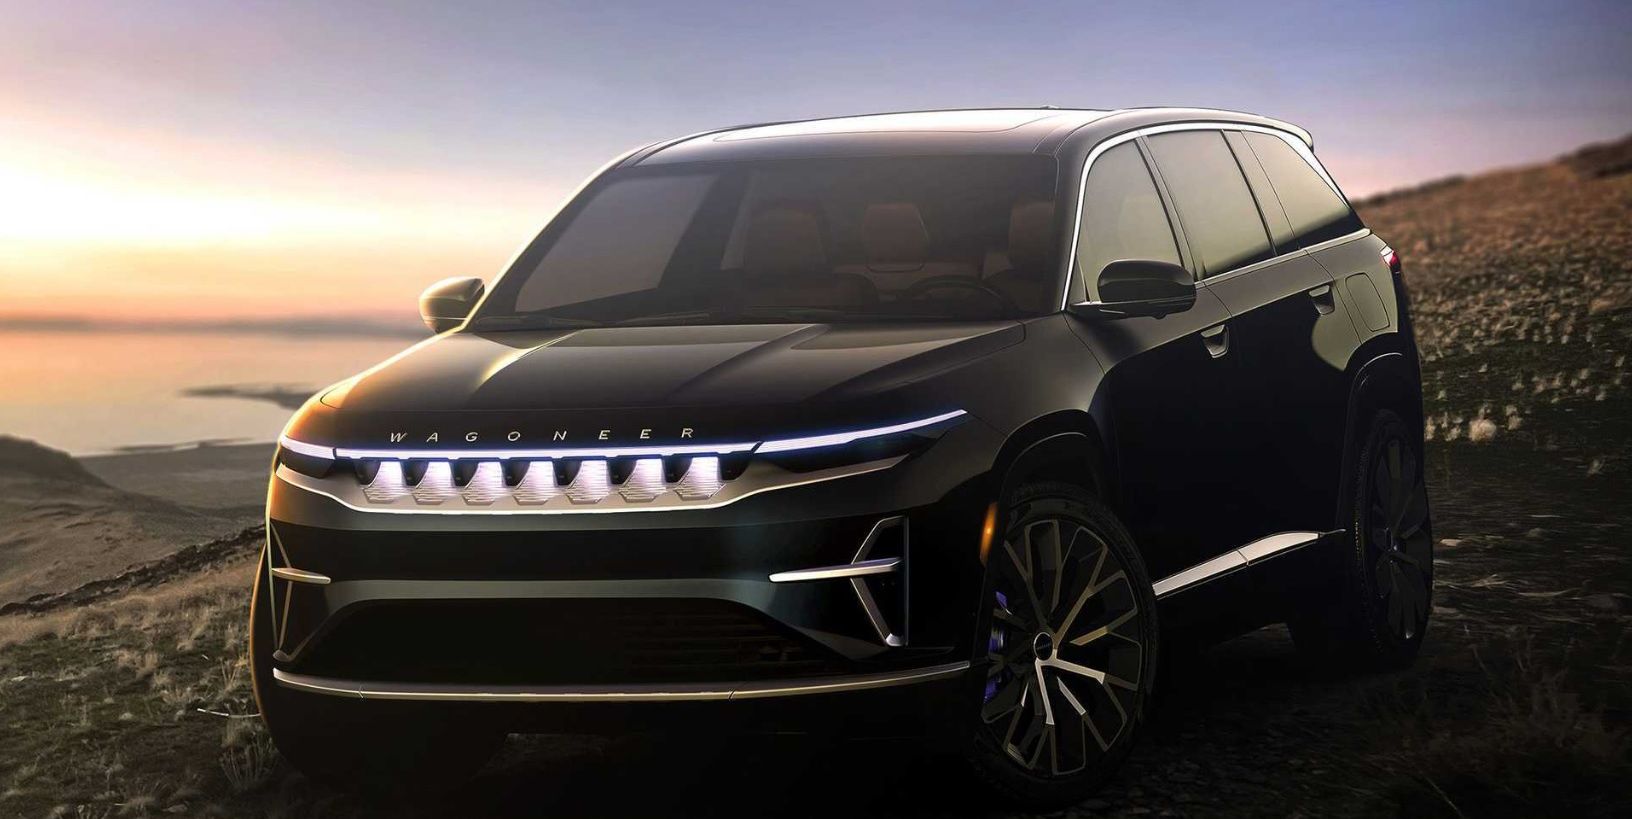 Electric Jeep Wagoneer S Promises 600 HP, with Another EV on the Way